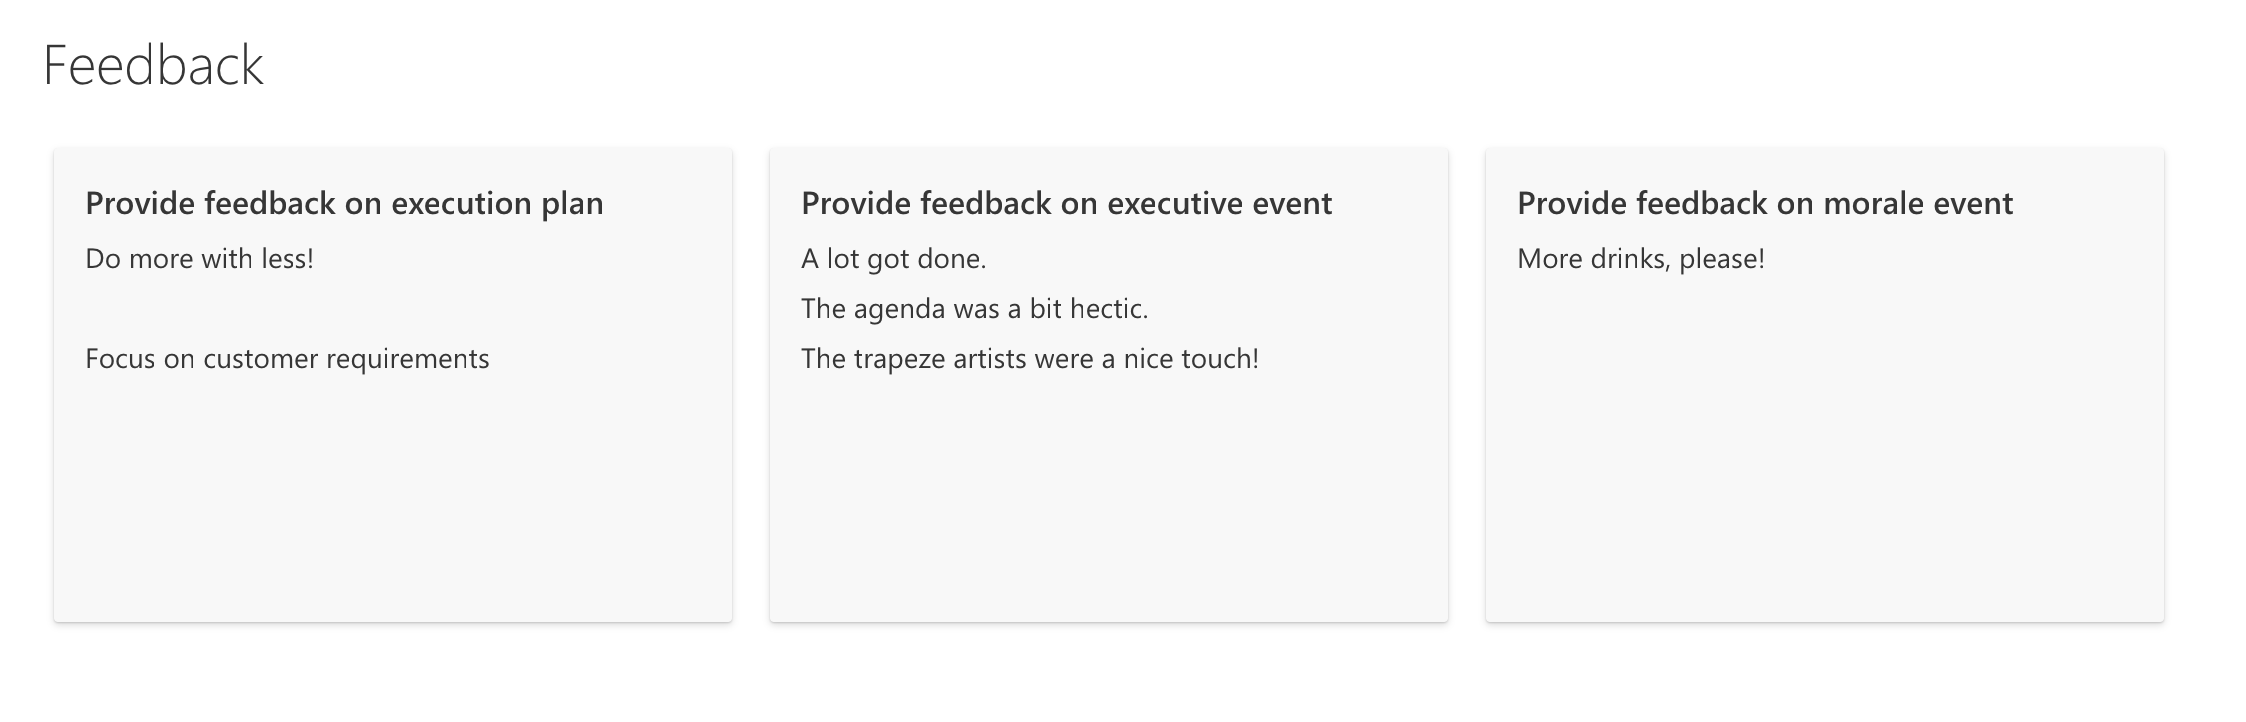 Feedback list formatted in Gallery layout